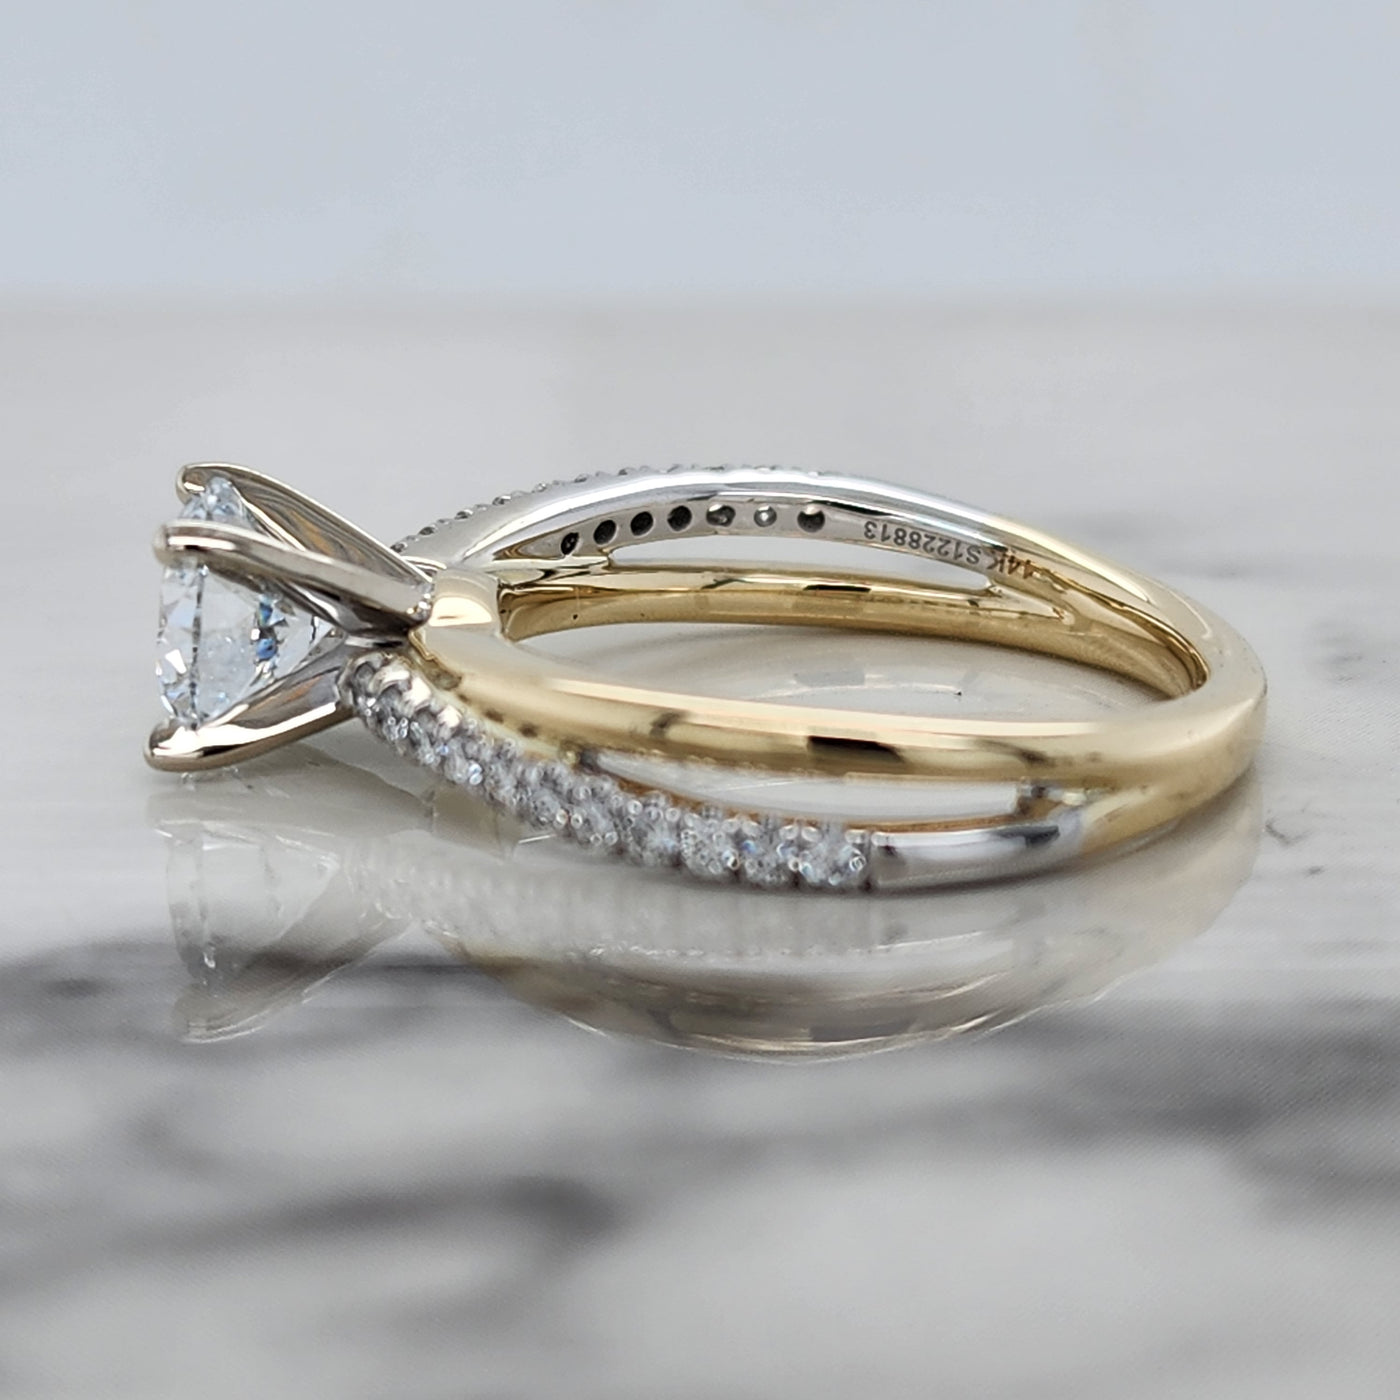 2 Tone Yellow and White Gold Engagement Ring With Round Center and Round Accents